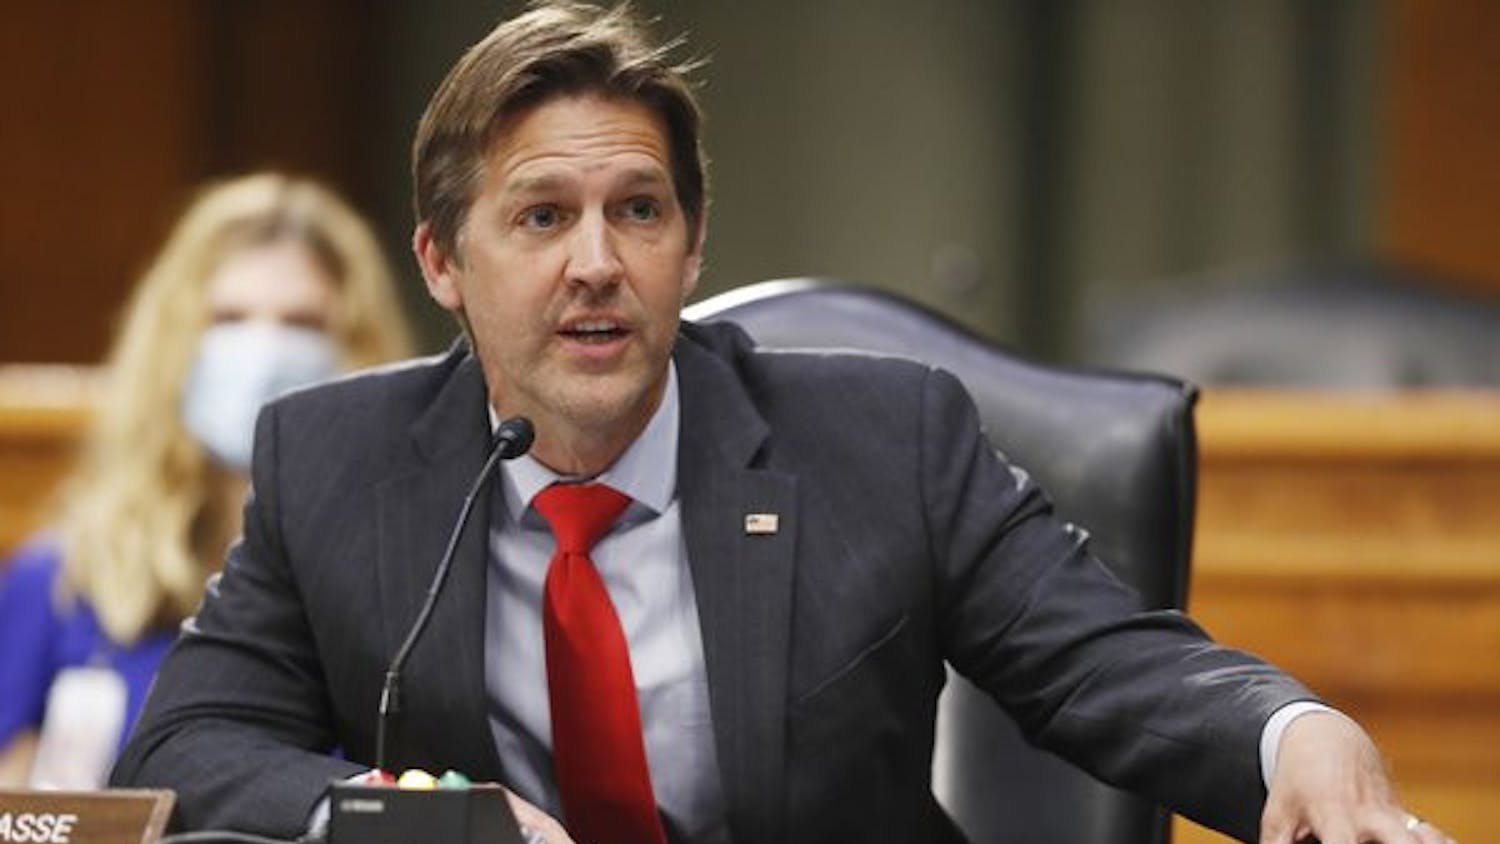 File image of Sen. Ben Sasse from The Associated Press.﻿